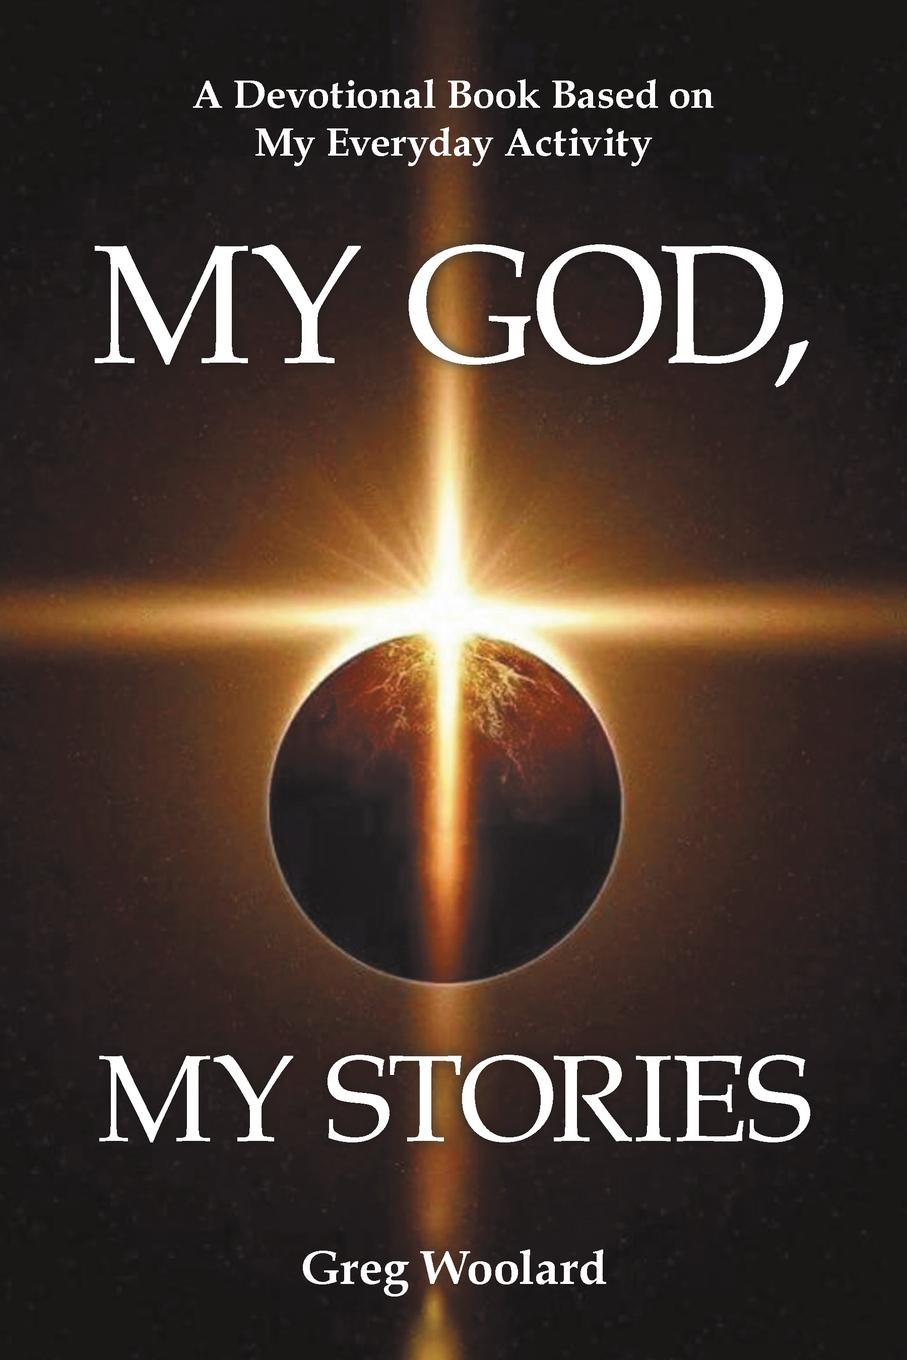 My God, My Stories. A Devotional Book Based on My Everyday Activity